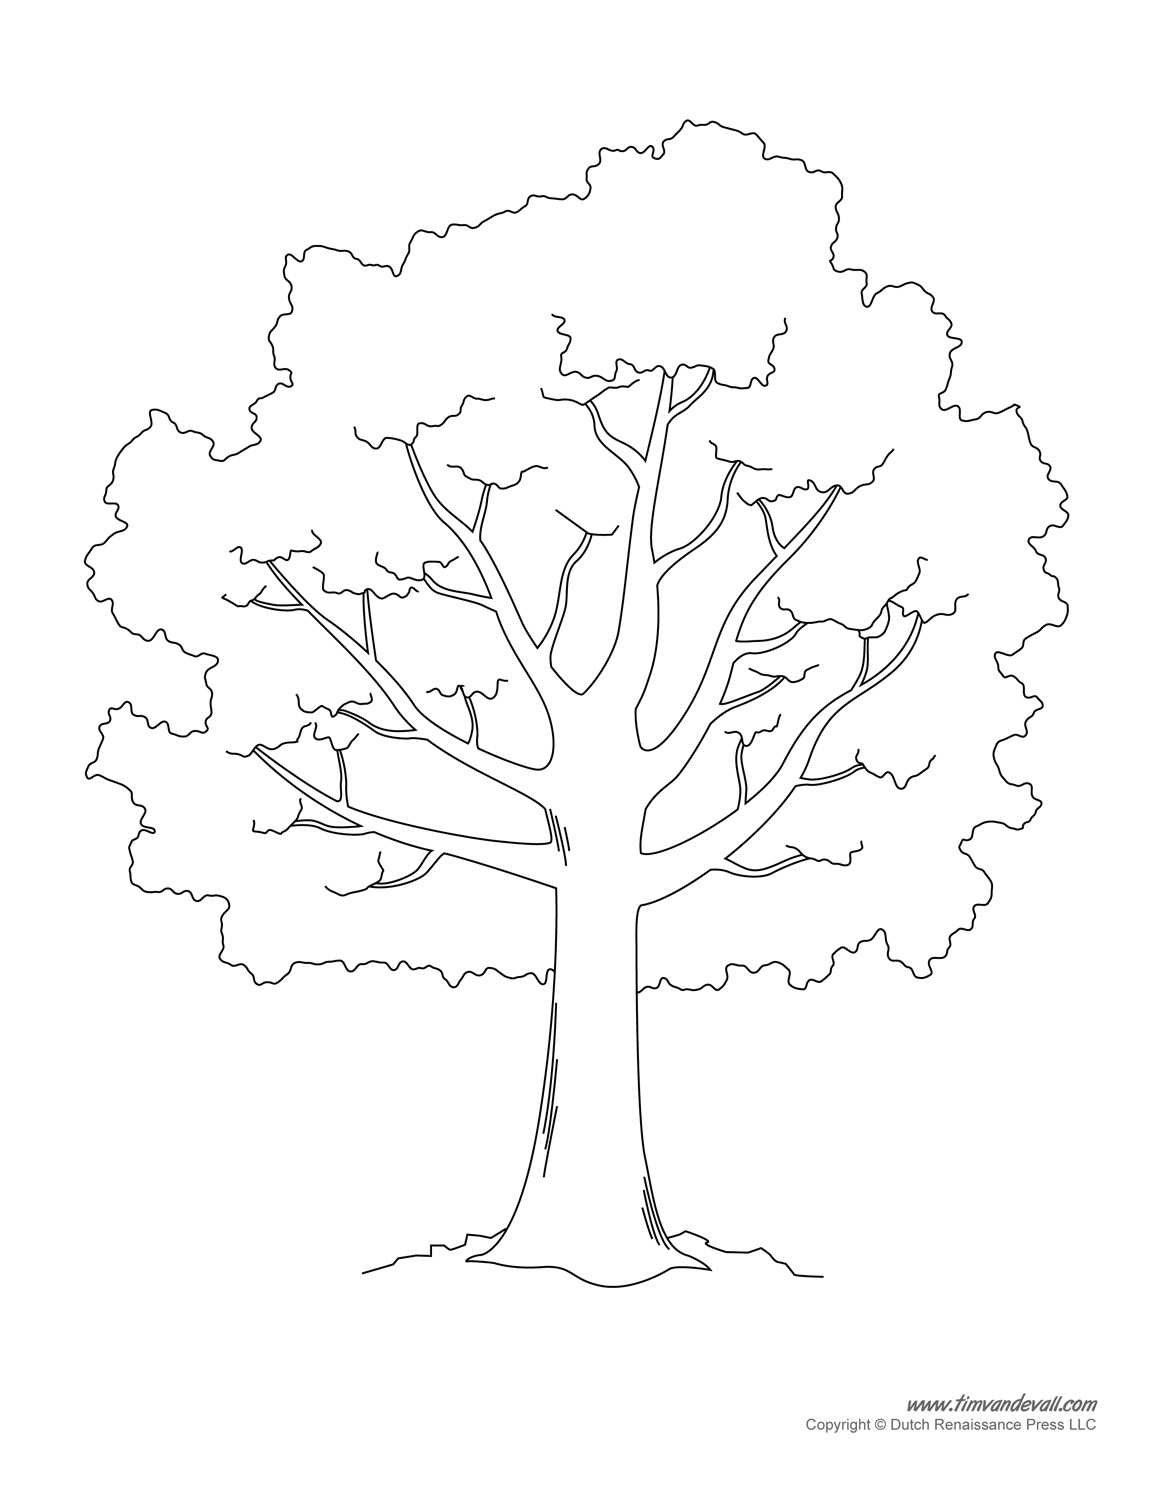 free-tree-template-download-free-tree-template-png-images-free